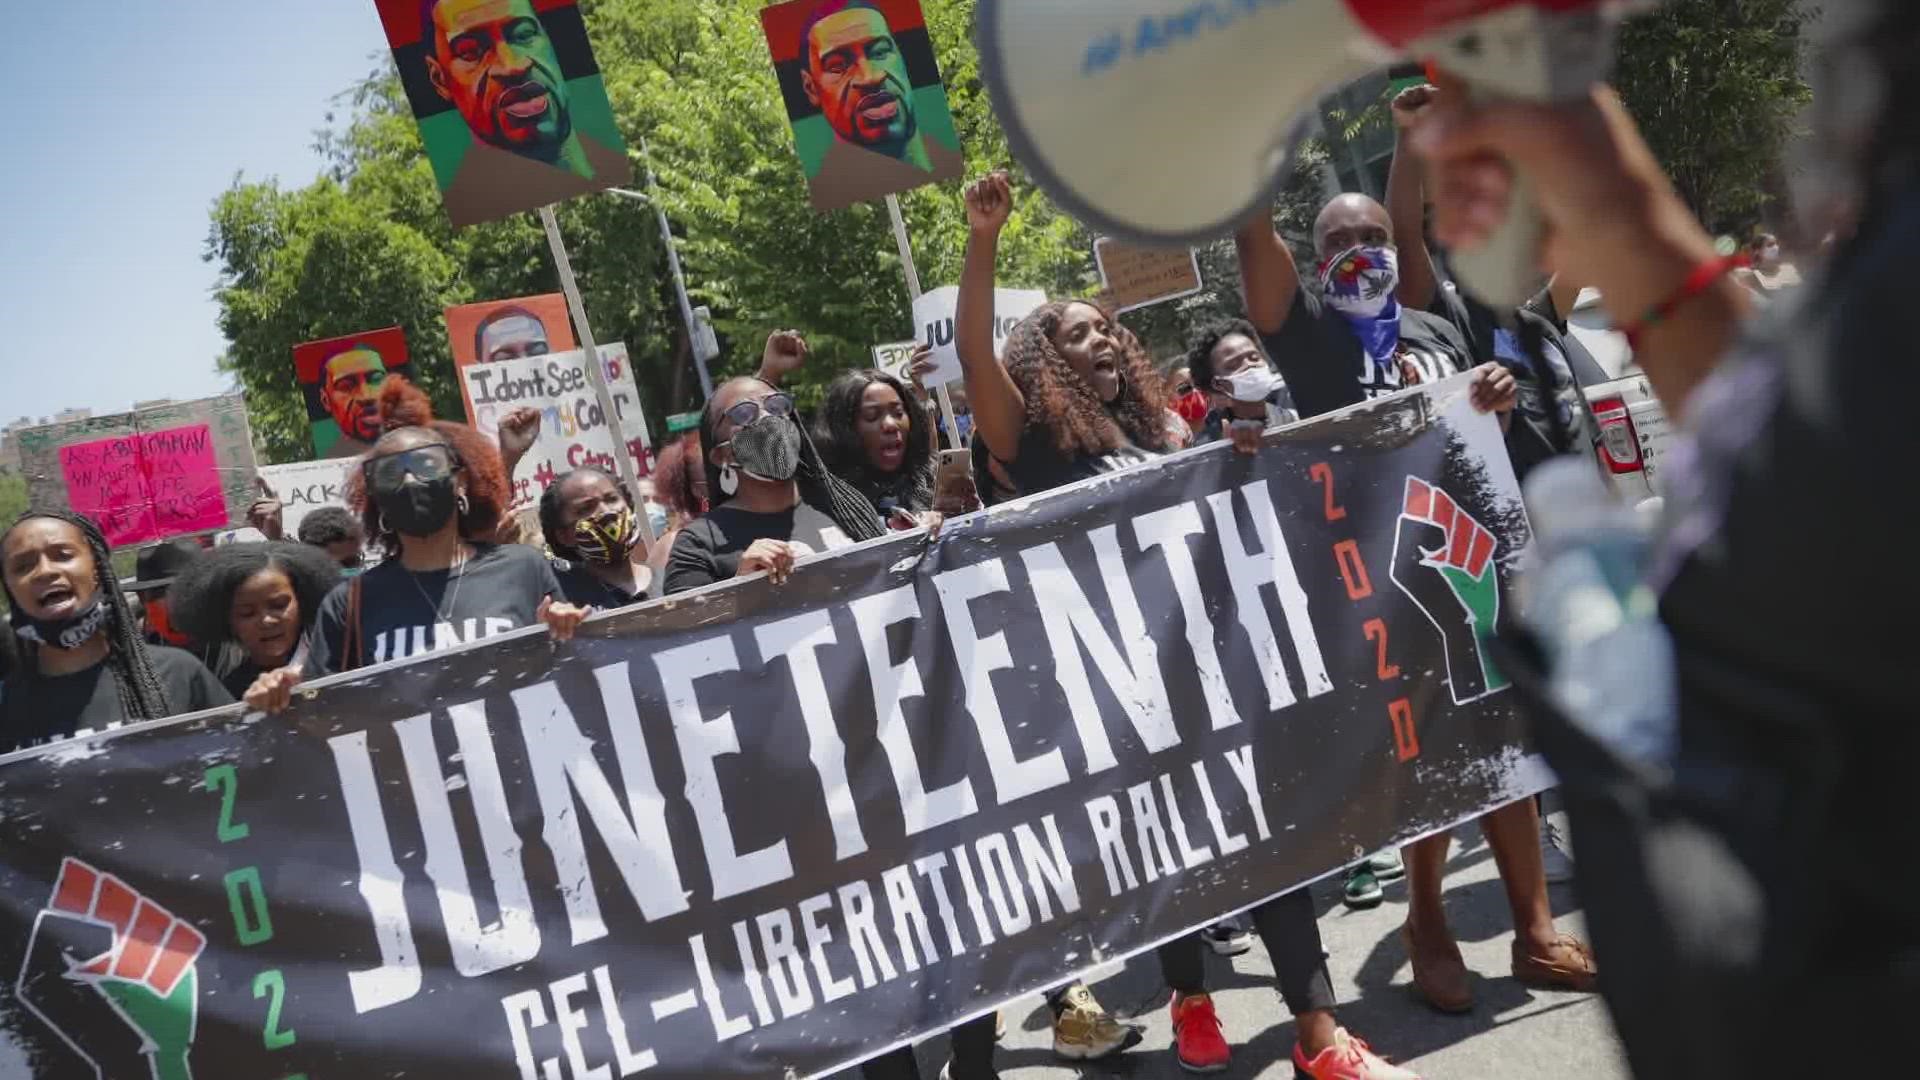 Juneteenth marks the end of slavery in America. Some say the holiday is an opportunity to look at the progress made in the U.S. and the extra work needed.